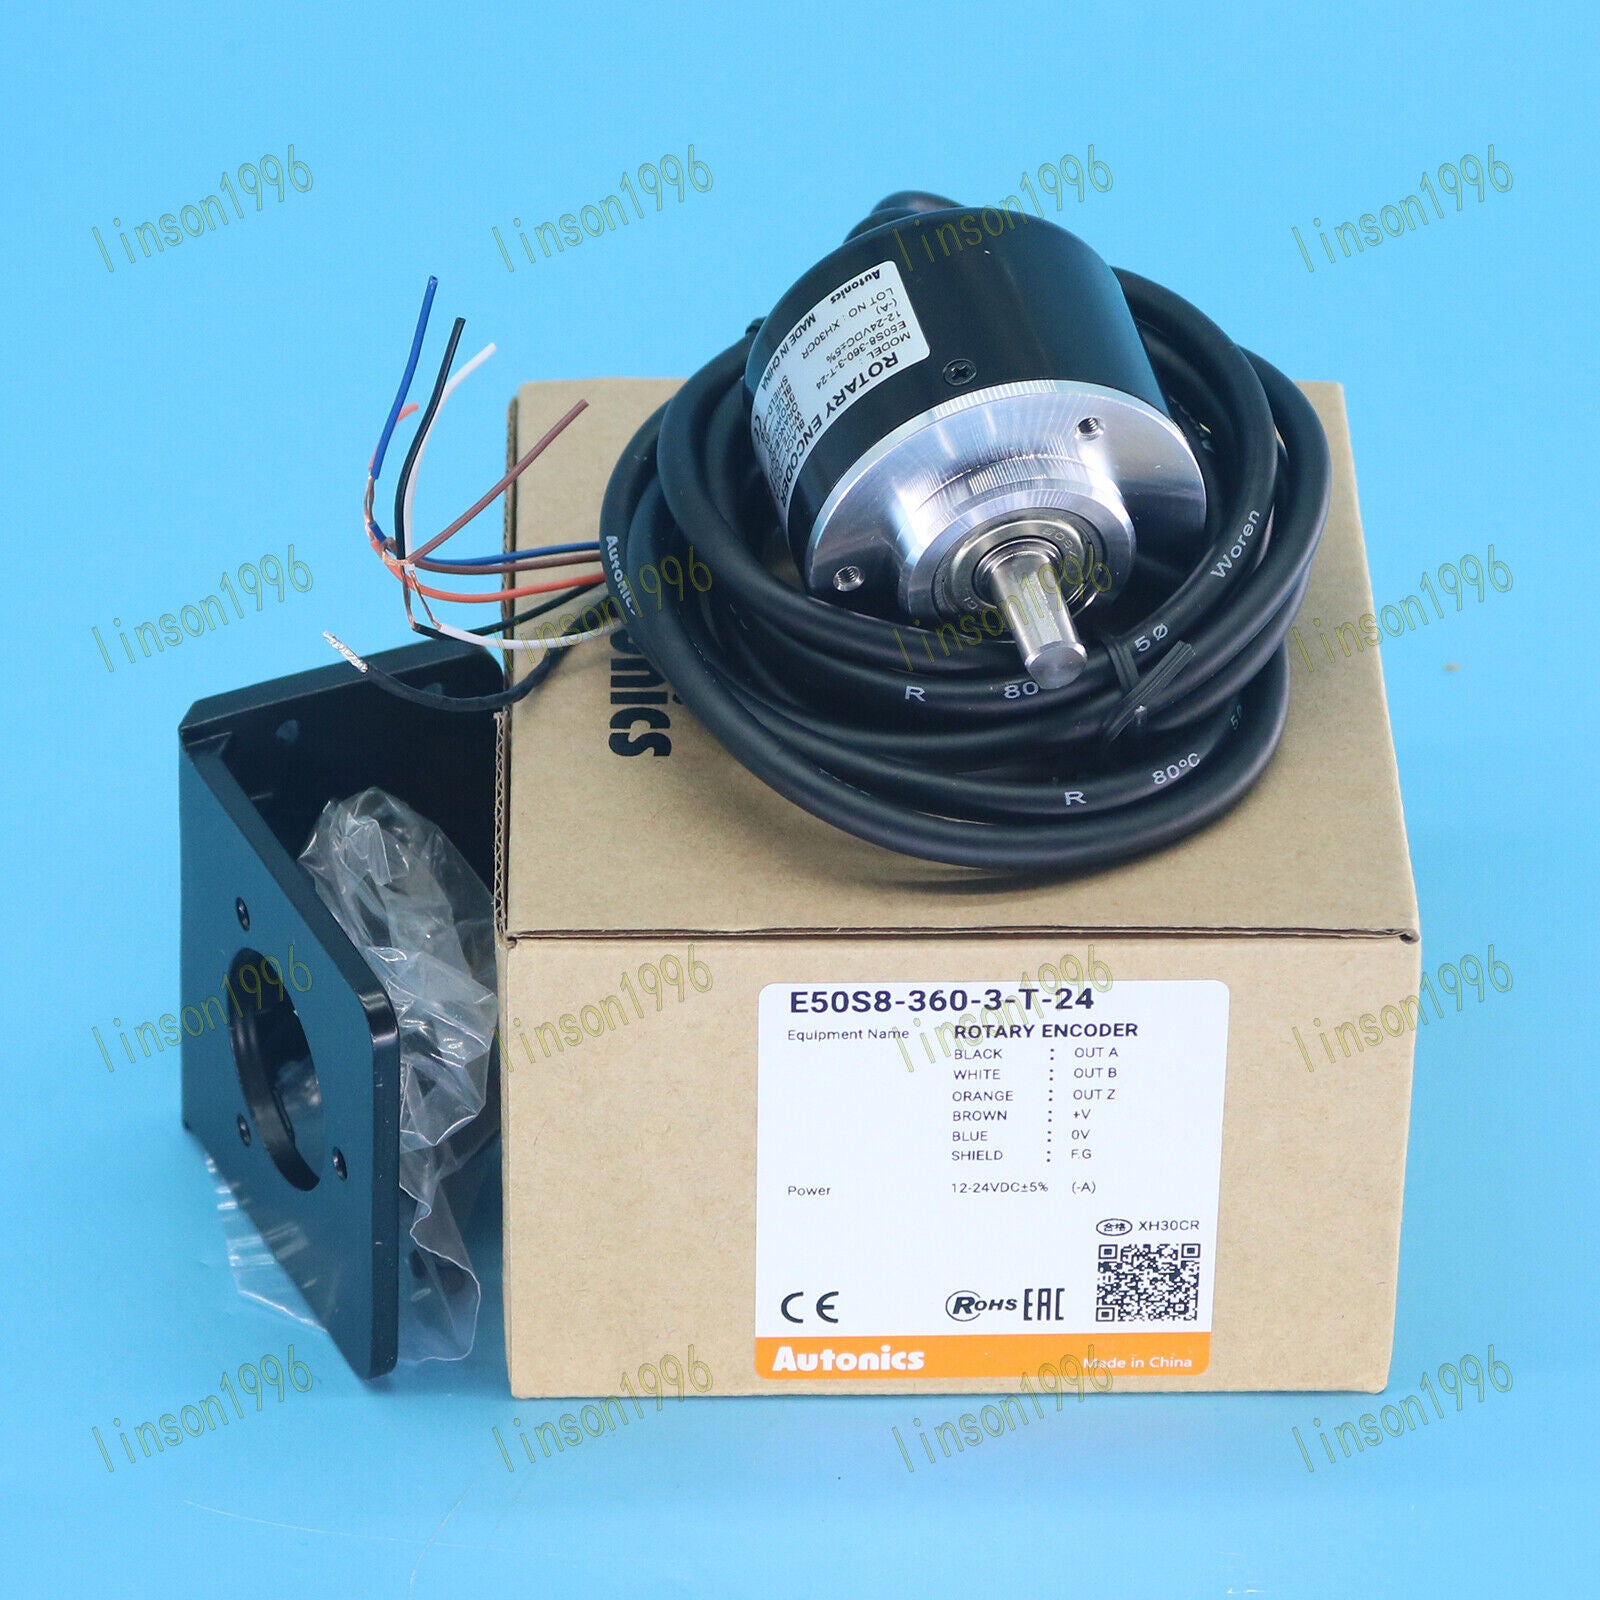 new 1PC  E50S8-360-3-T-24 For Autonics rotary encoder Fast Delivery